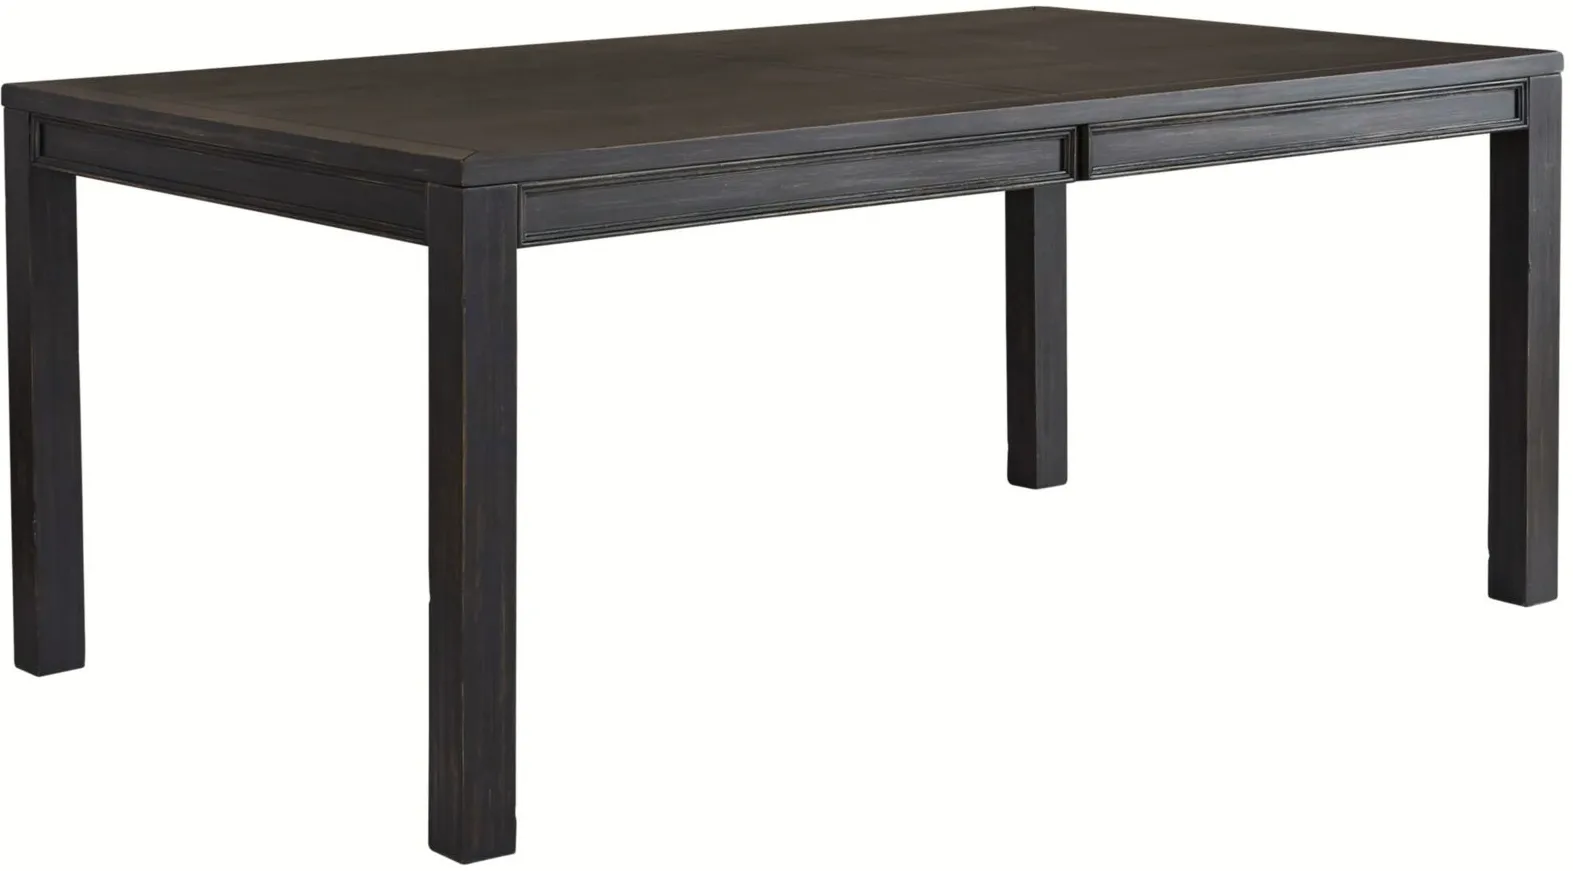 Jeanette Rectangular Dining Table in Black by Ashley Furniture